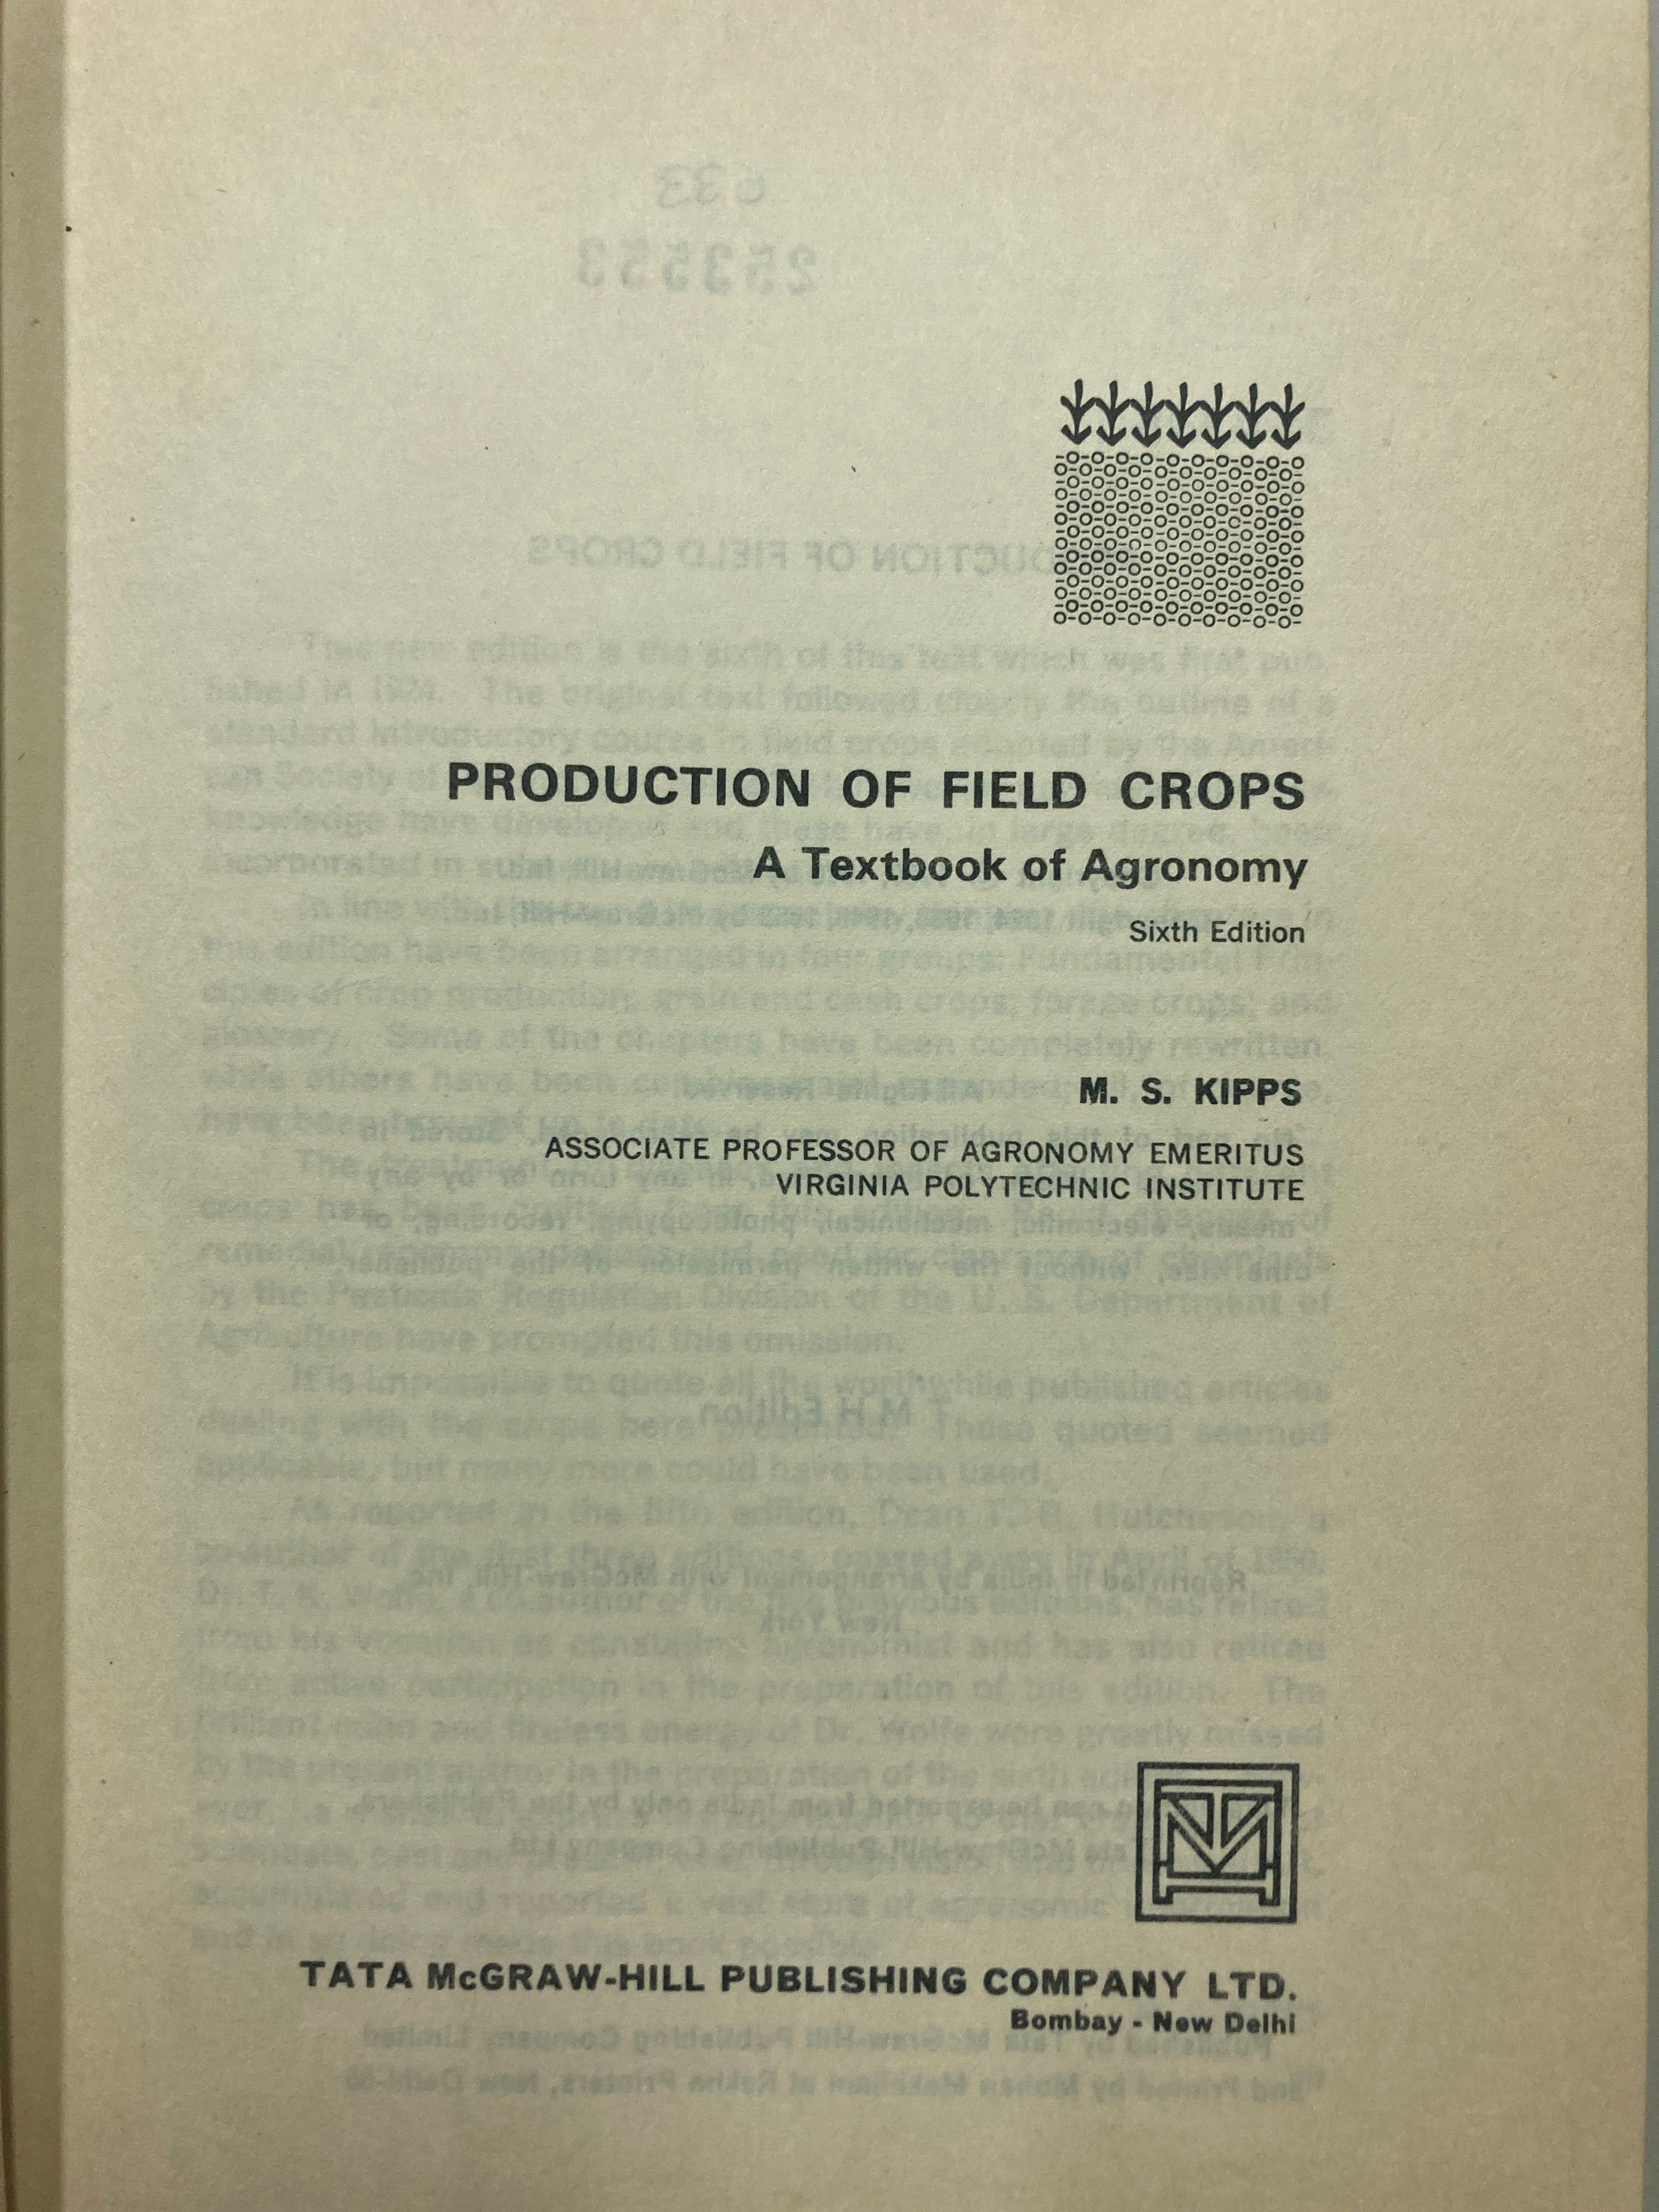 Production of field crops.